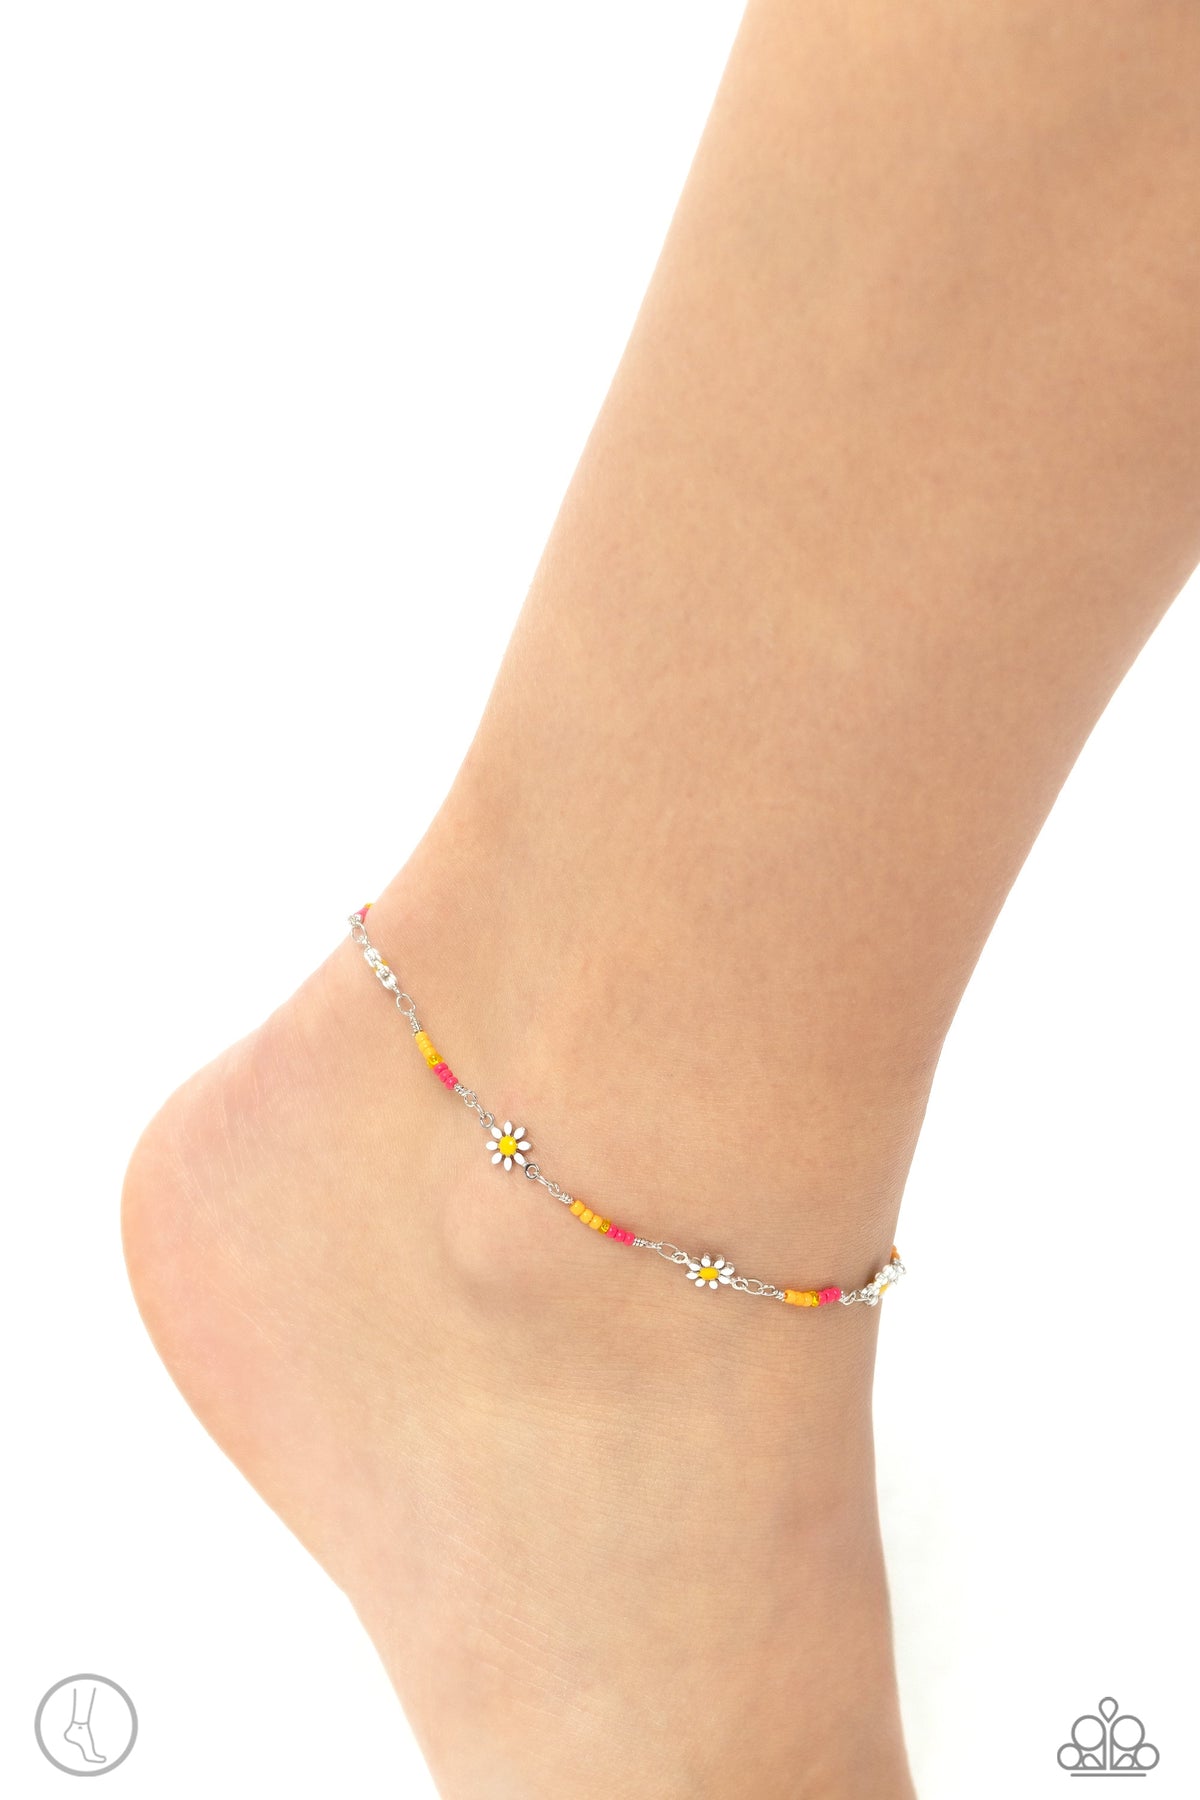 Sweetest Daydream Pink &amp; Multi Floral Anklet - Paparazzi Accessories-on model - CarasShop.com - $5 Jewelry by Cara Jewels